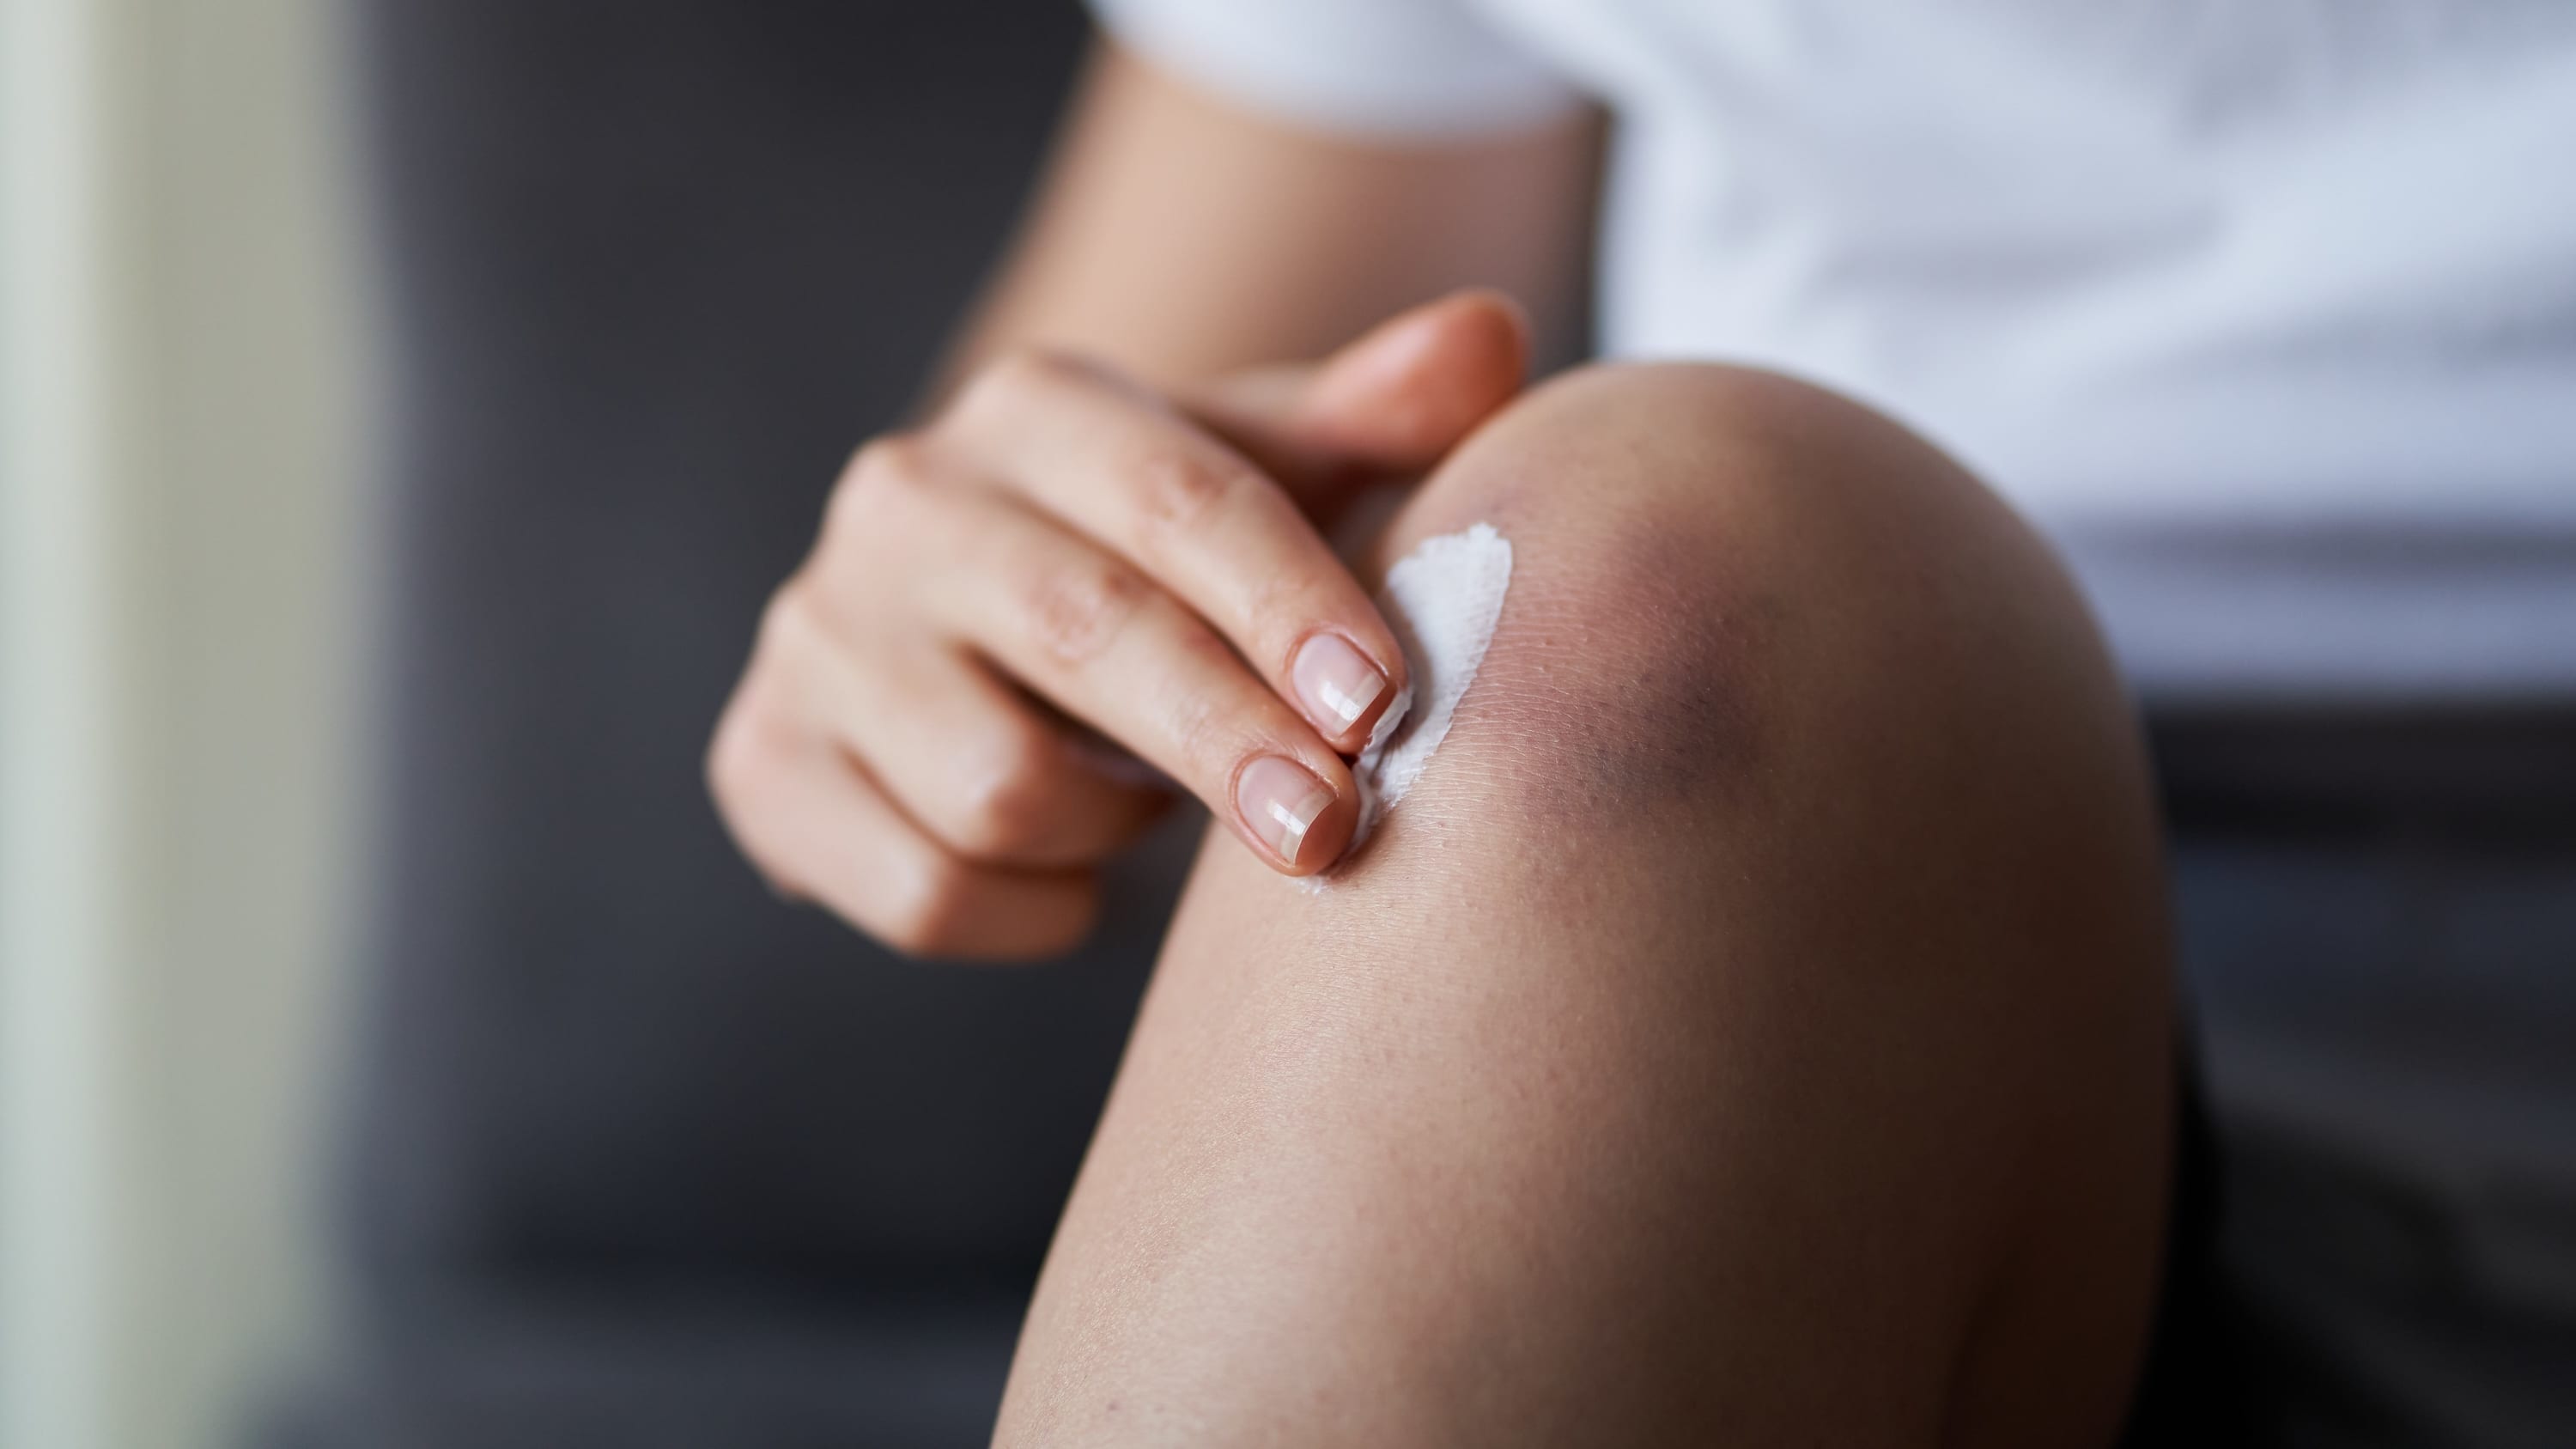 person who bruises easily from bleeding disorders putting on cream